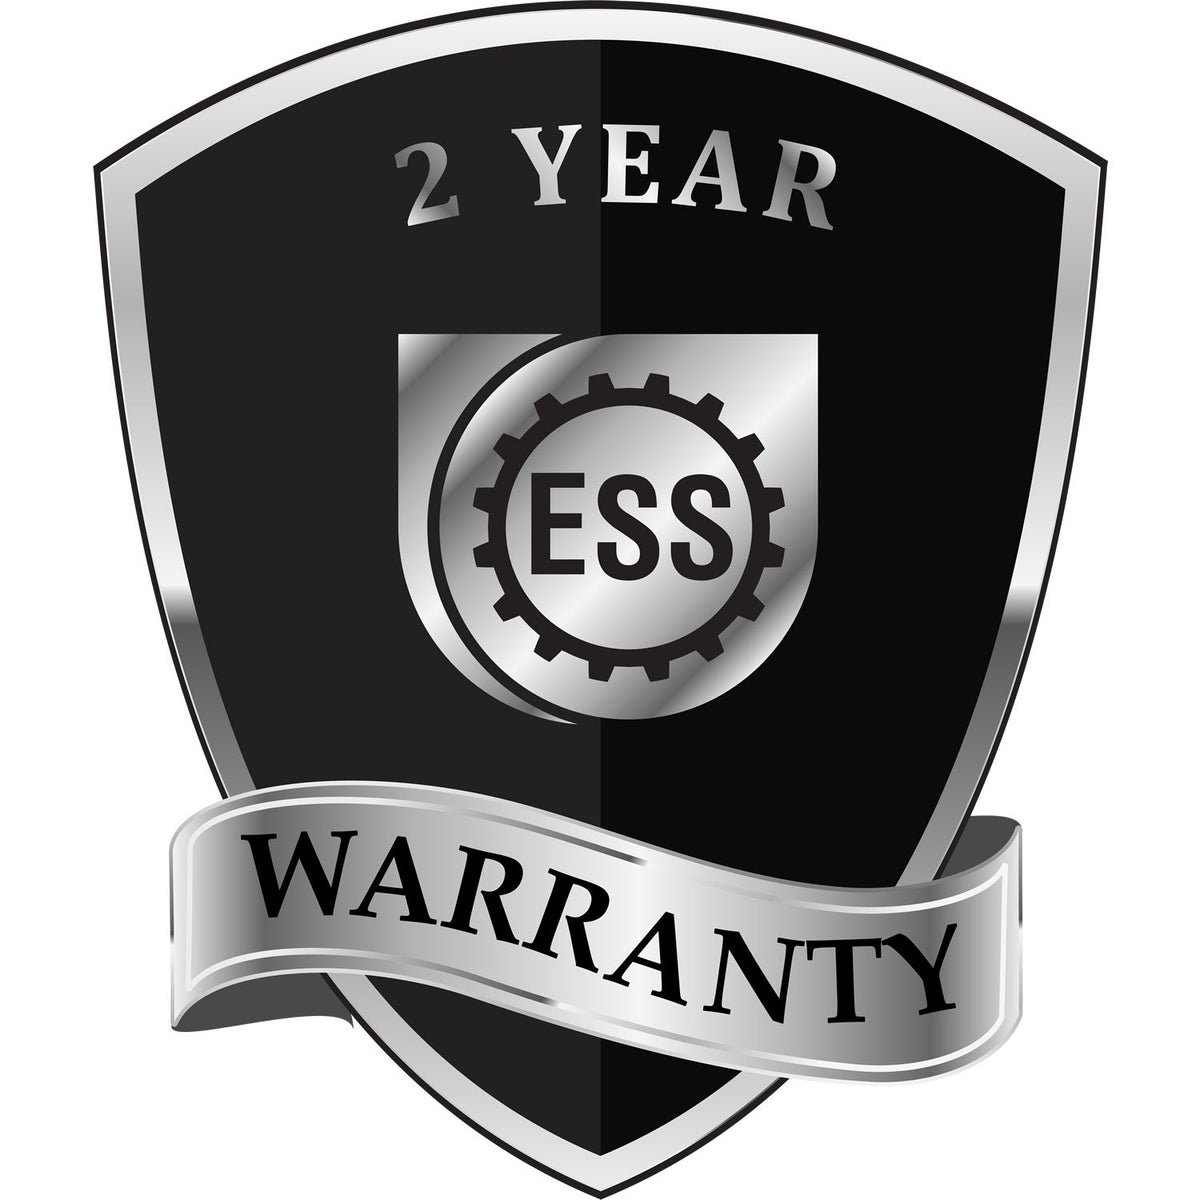 A black and silver badge or emblem showing warranty information for the Gift Minnesota Landscape Architect Seal